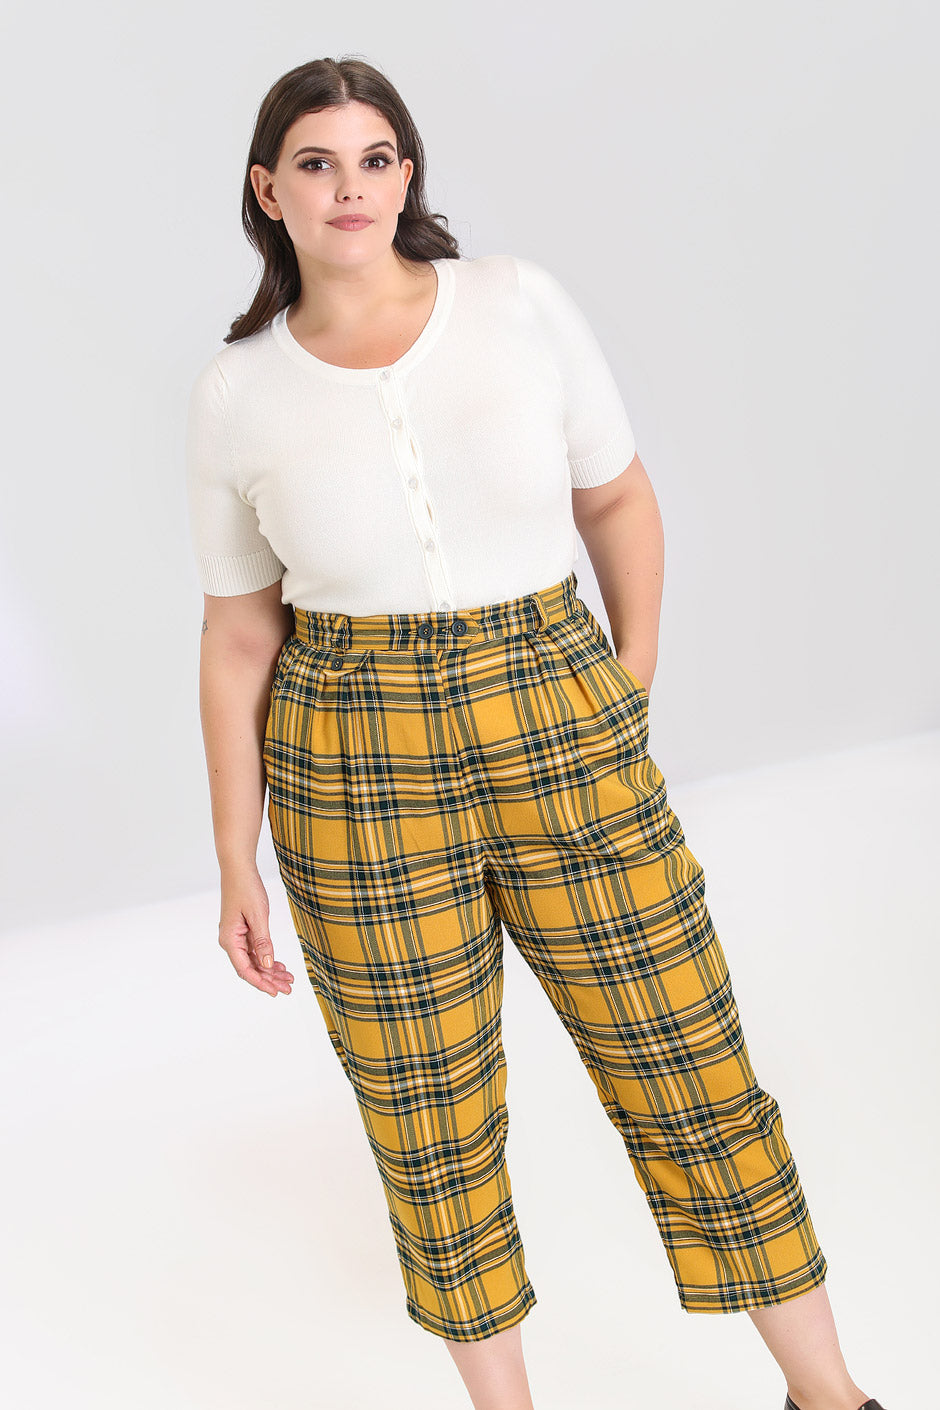 YELLOW PLAID TOP CAT PANT  Posers Hollywood